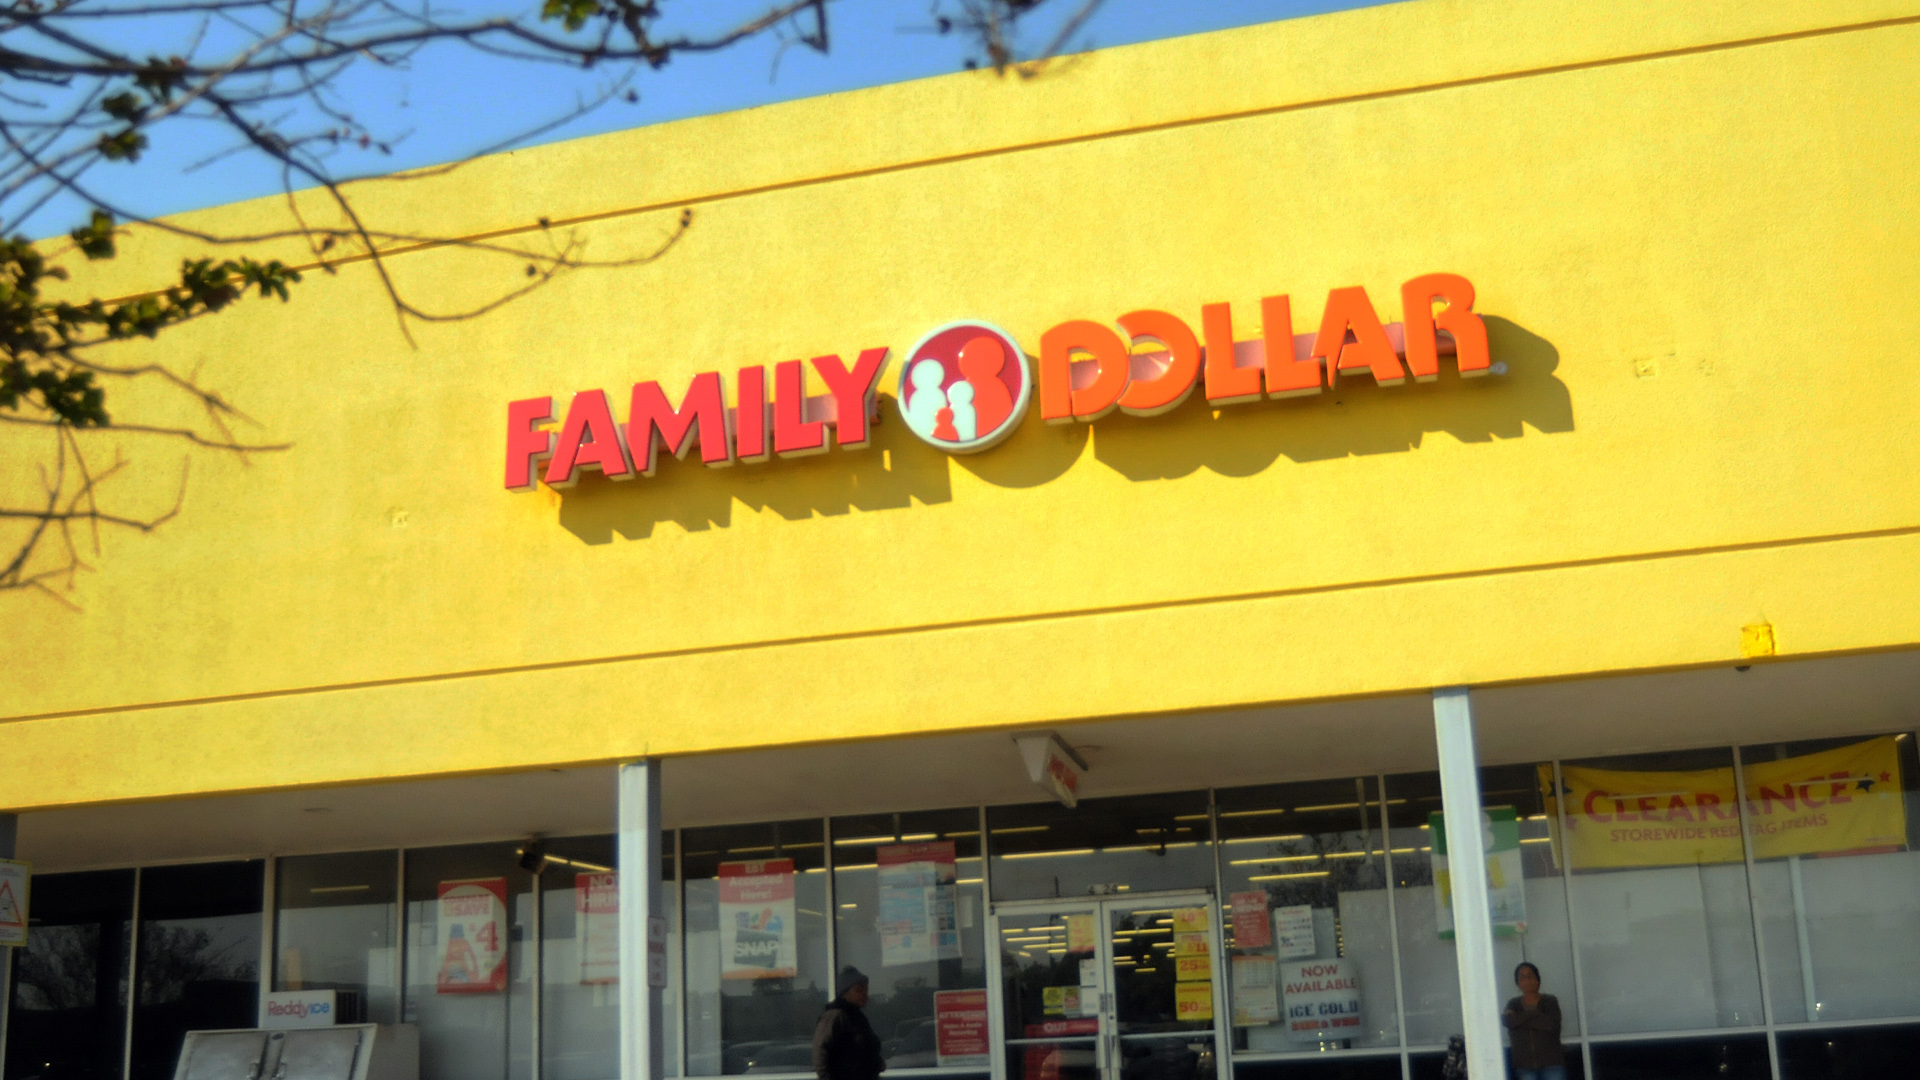 Family Dollar confirms 35 store closures this week only days after announcing 1,000 locations will shut down [Video]